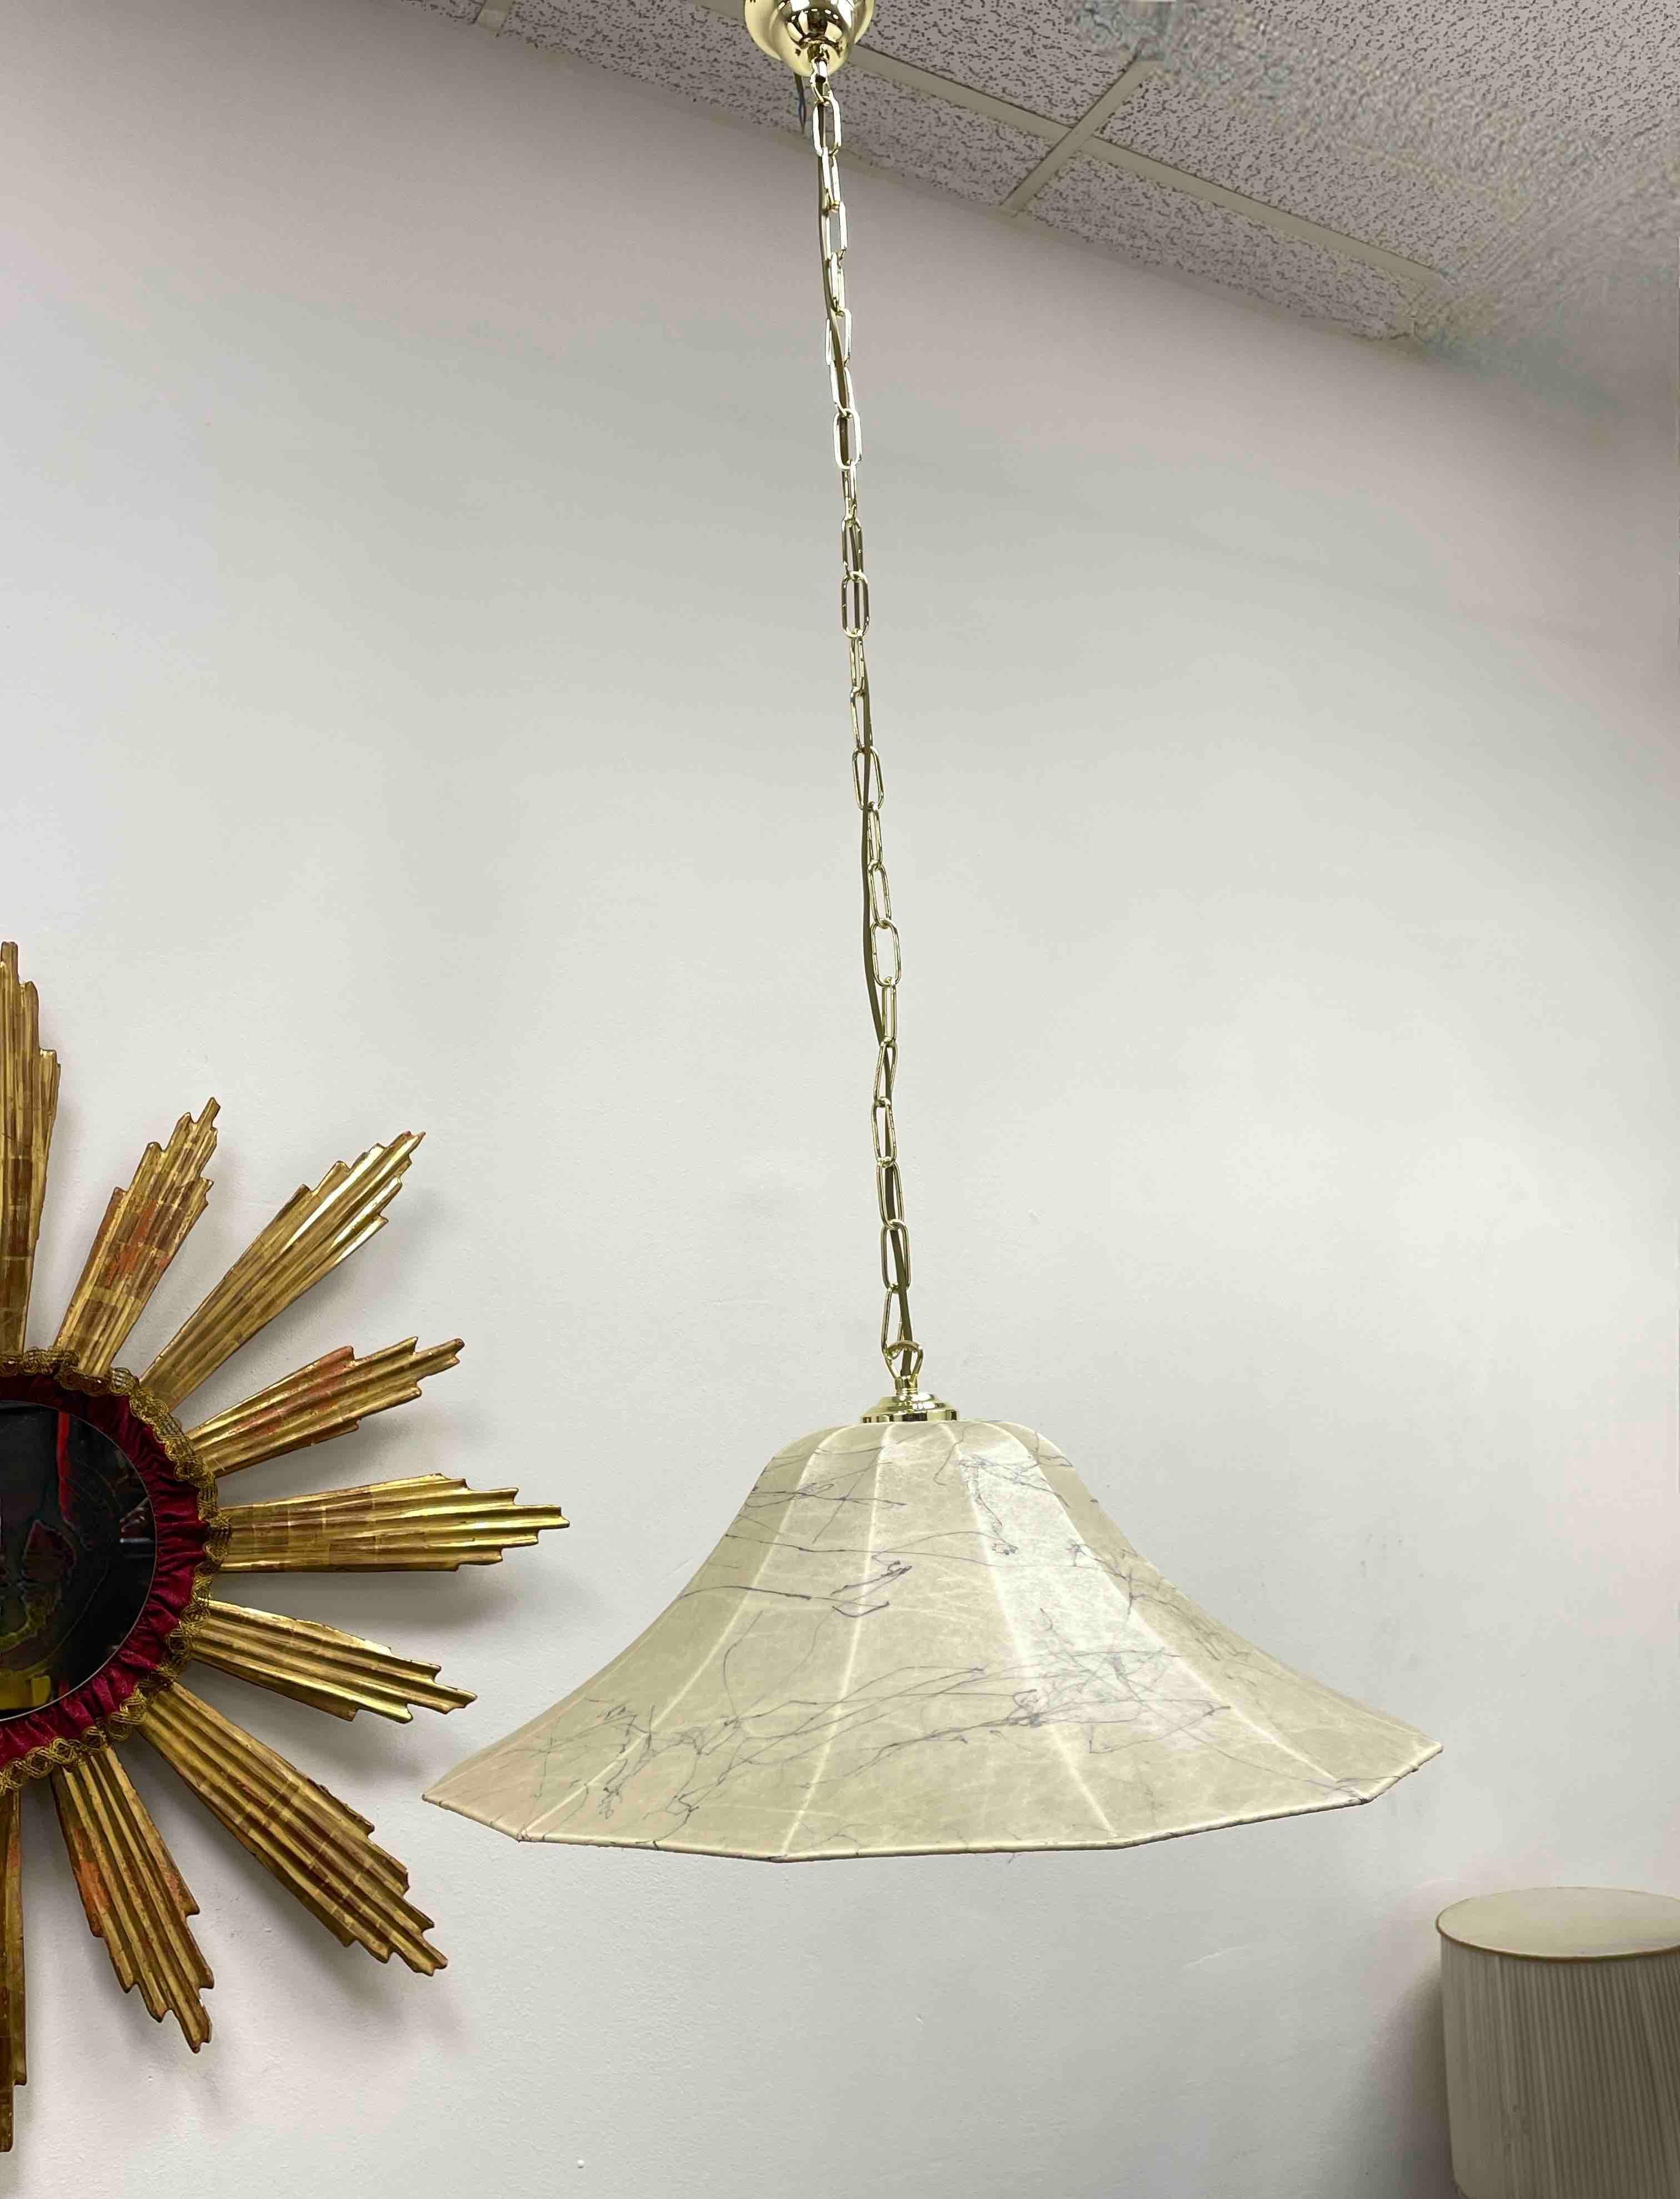 A beautifully Cocoon pendant light made by Goldkant, 1960s Germany, comes from the Achille Castiglioni Era. Lampshade is in very good vintage condition. Brass chain with canopy is approx. 41